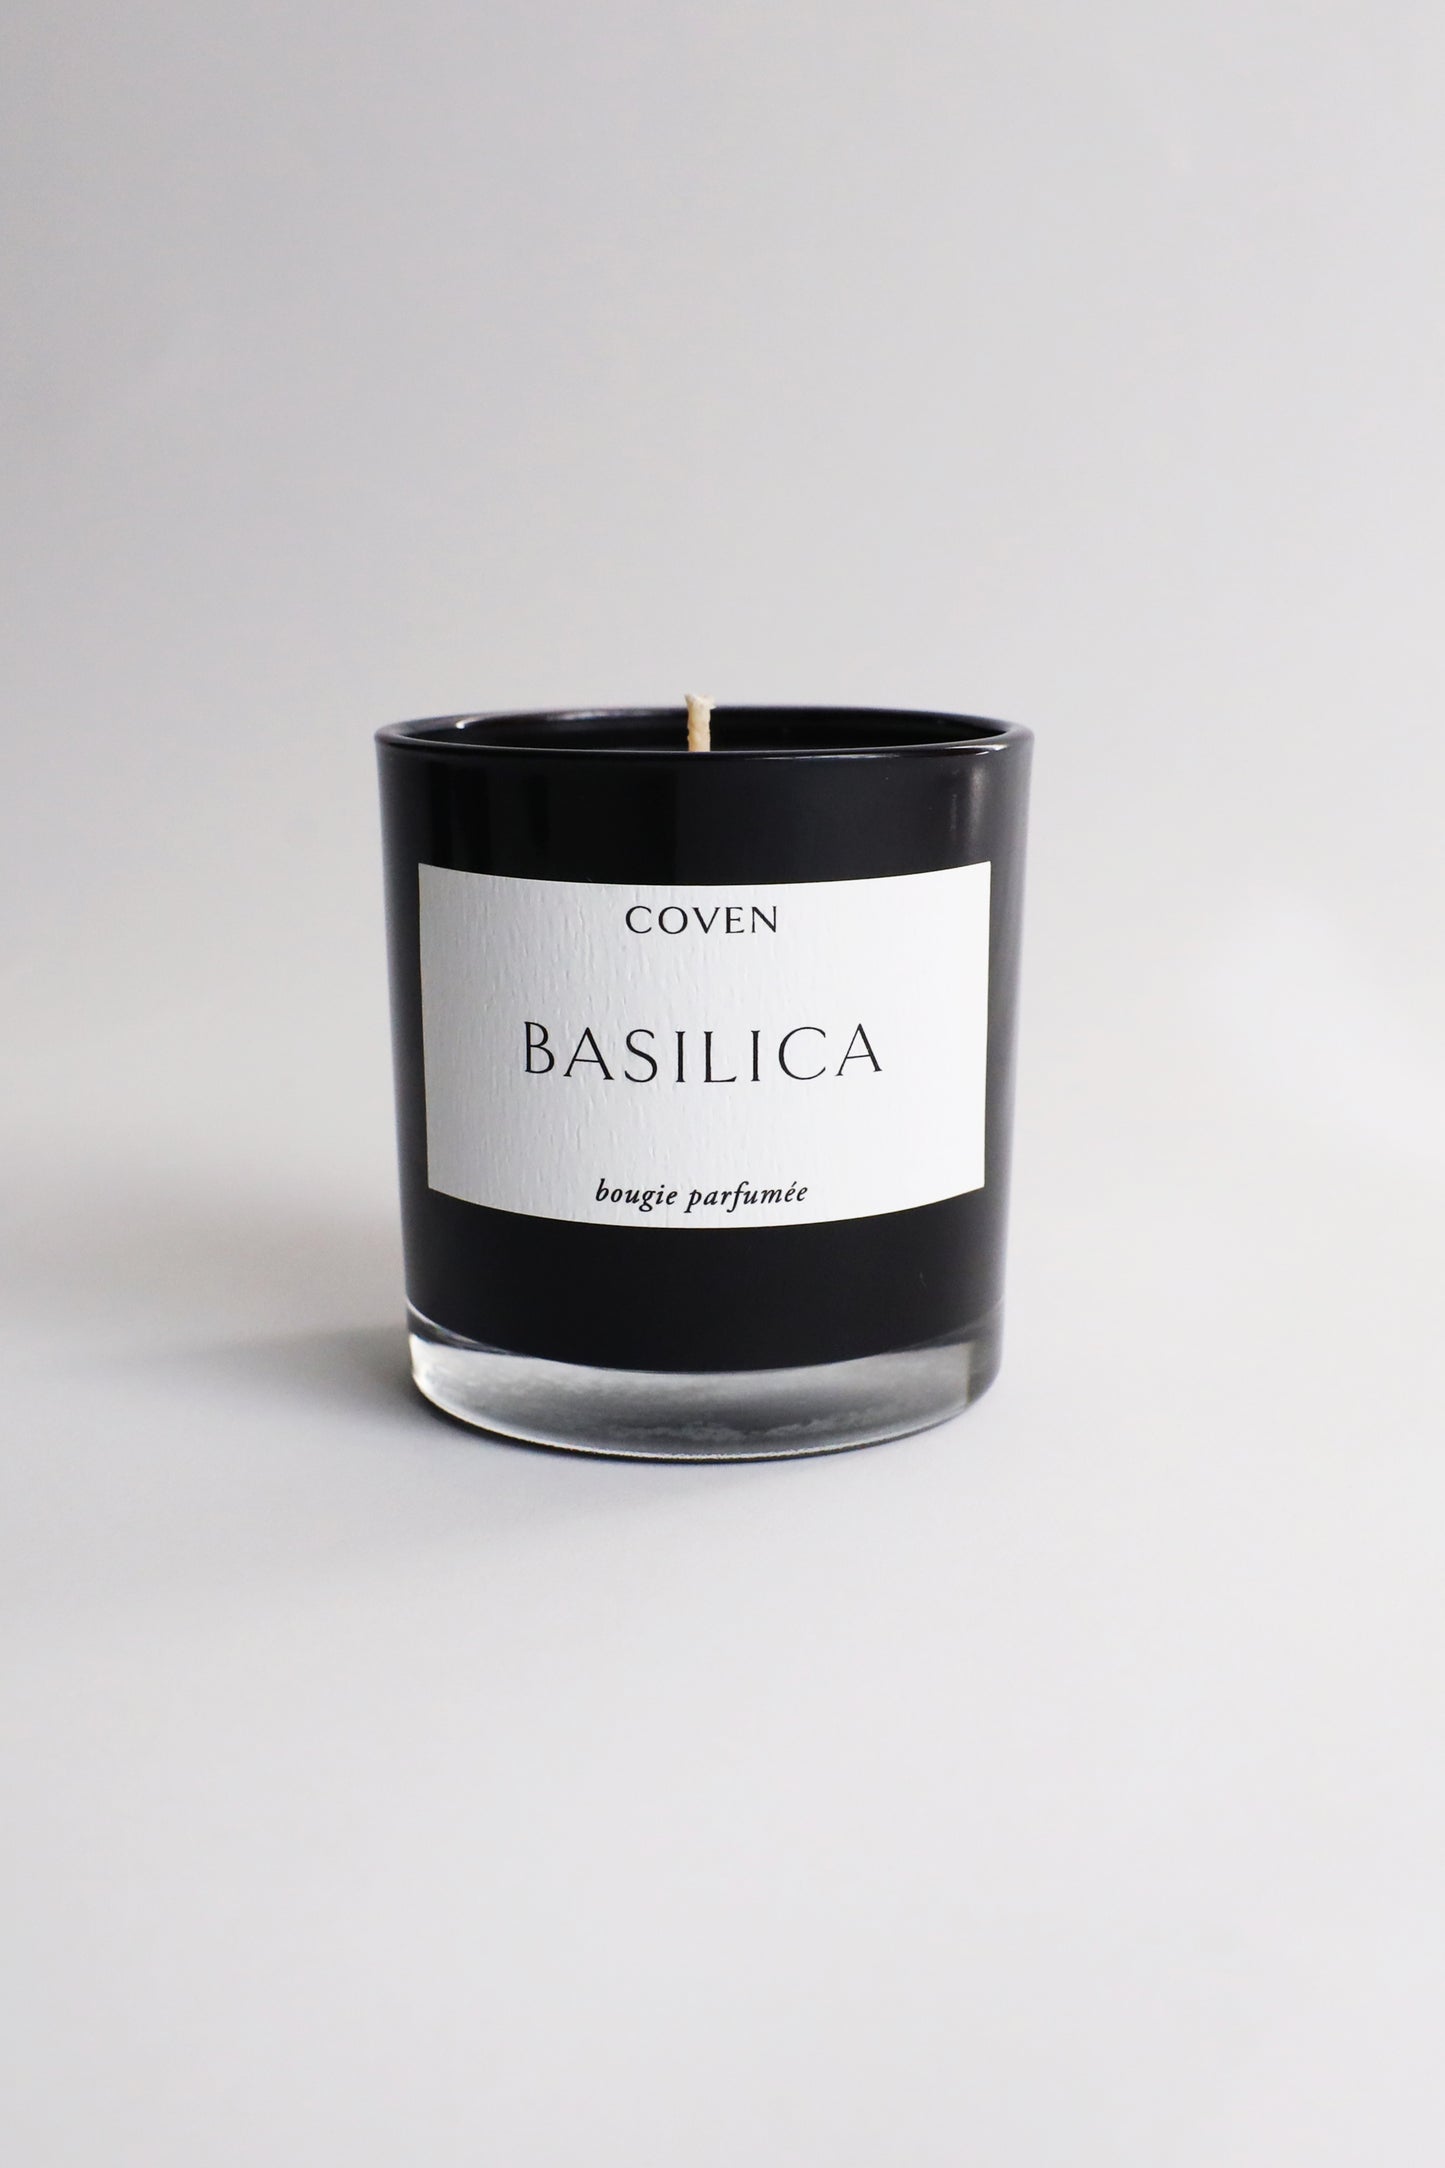 Coven Basilica Candle - Golden Oud Incense